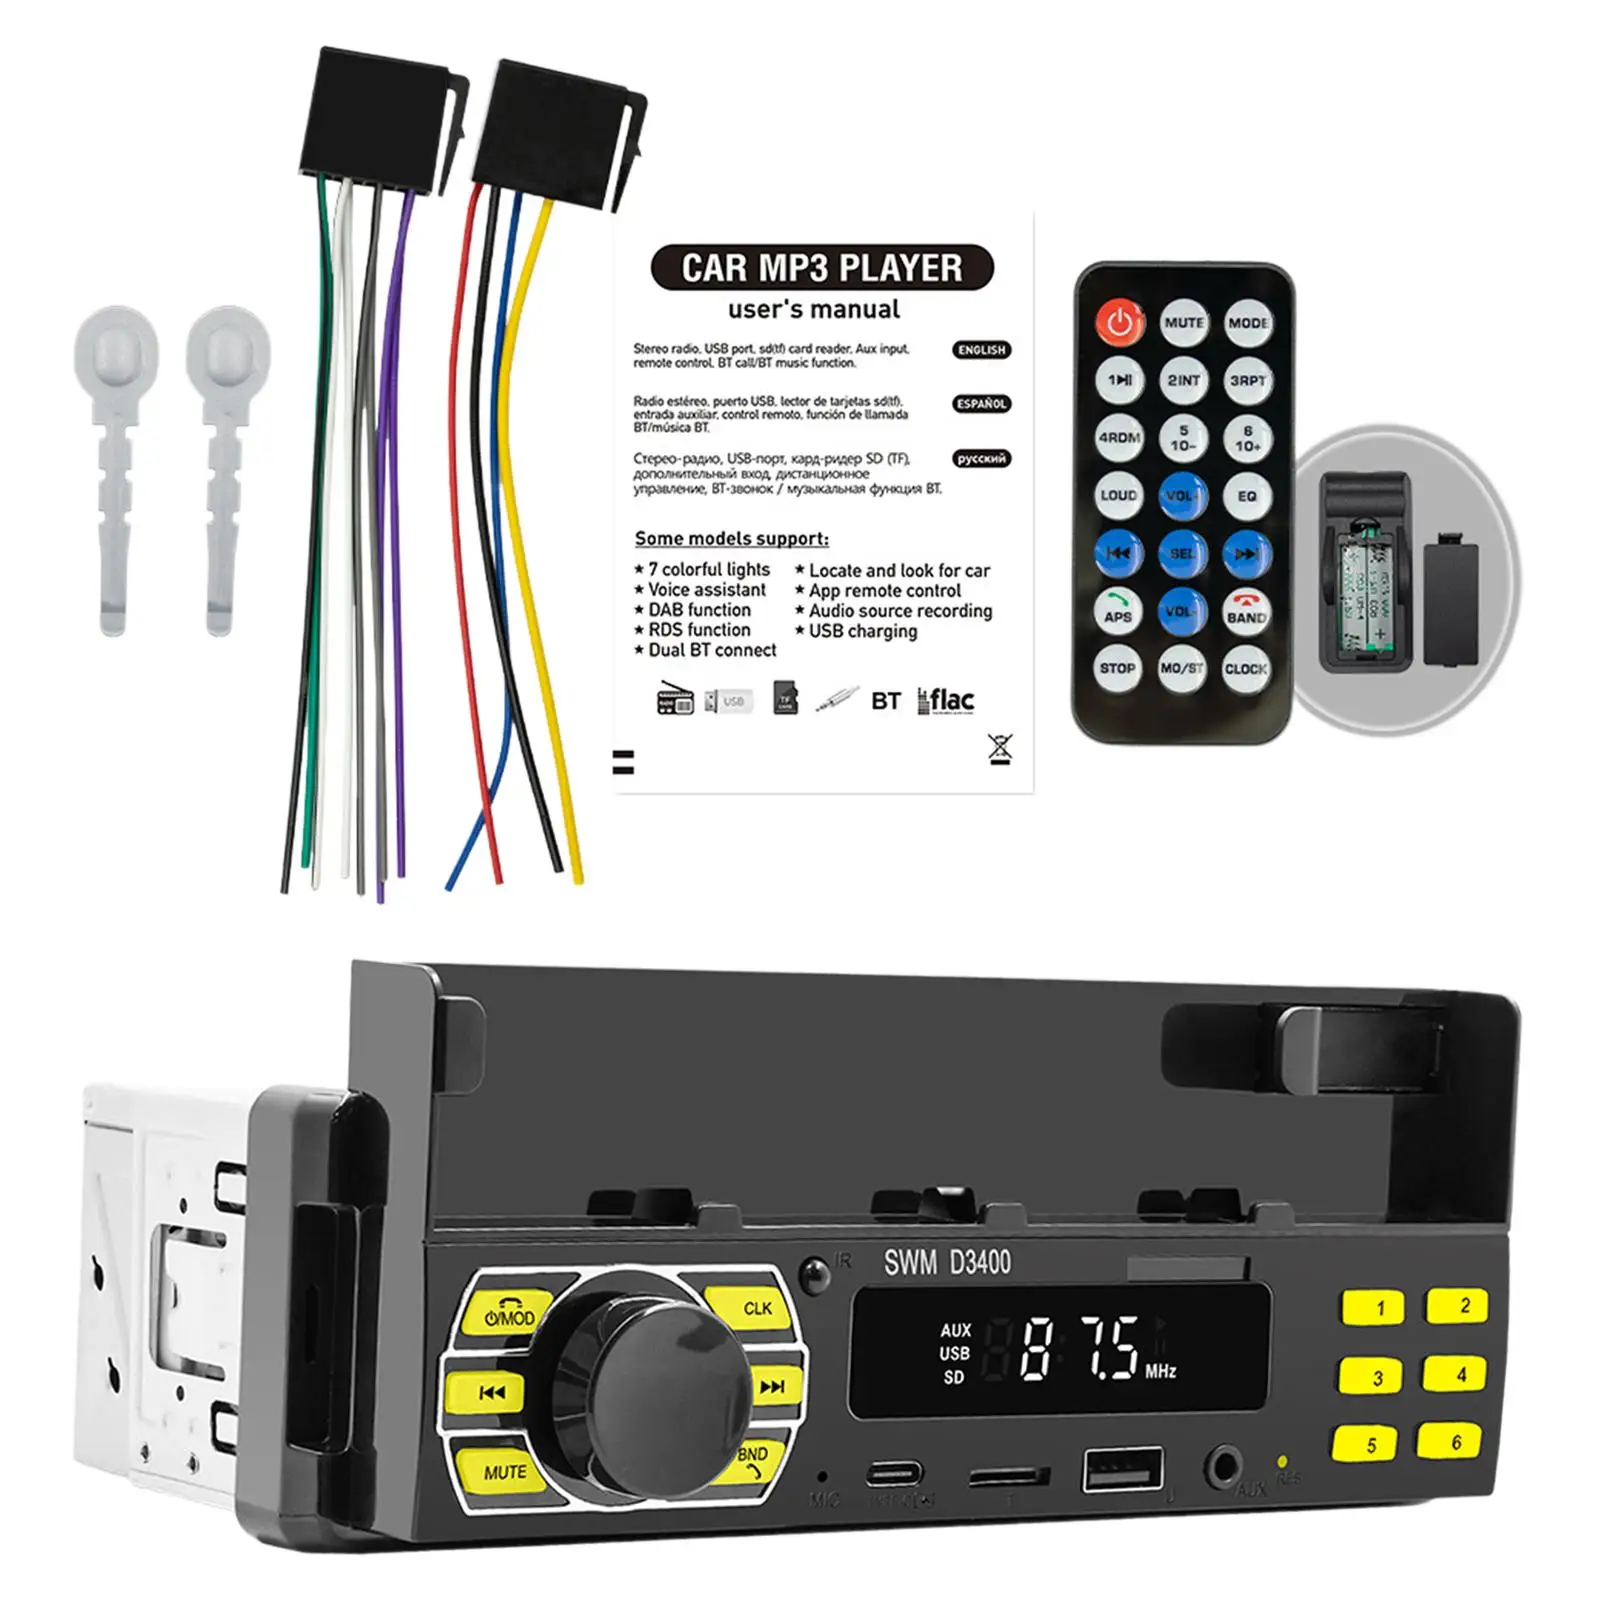 Car Stereo V5.0 LED Display Handsfree AUX Input FM Audio Voice Control WMA/WAV//ape Multimedia Player for Trucks Cars